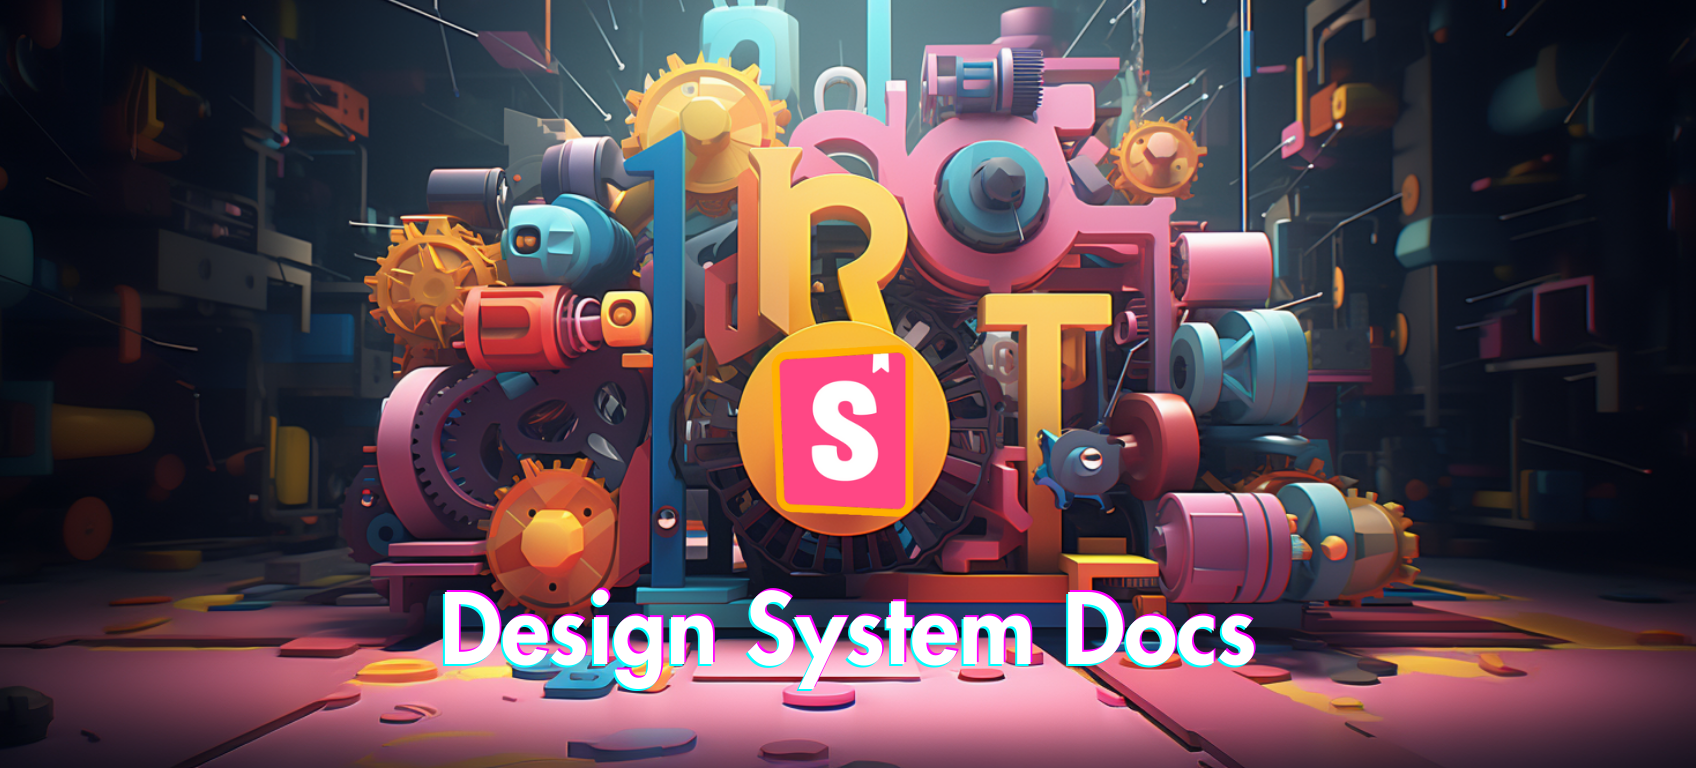 Illustration of a big machine made of shapes and letters illustrating a design system coming together.